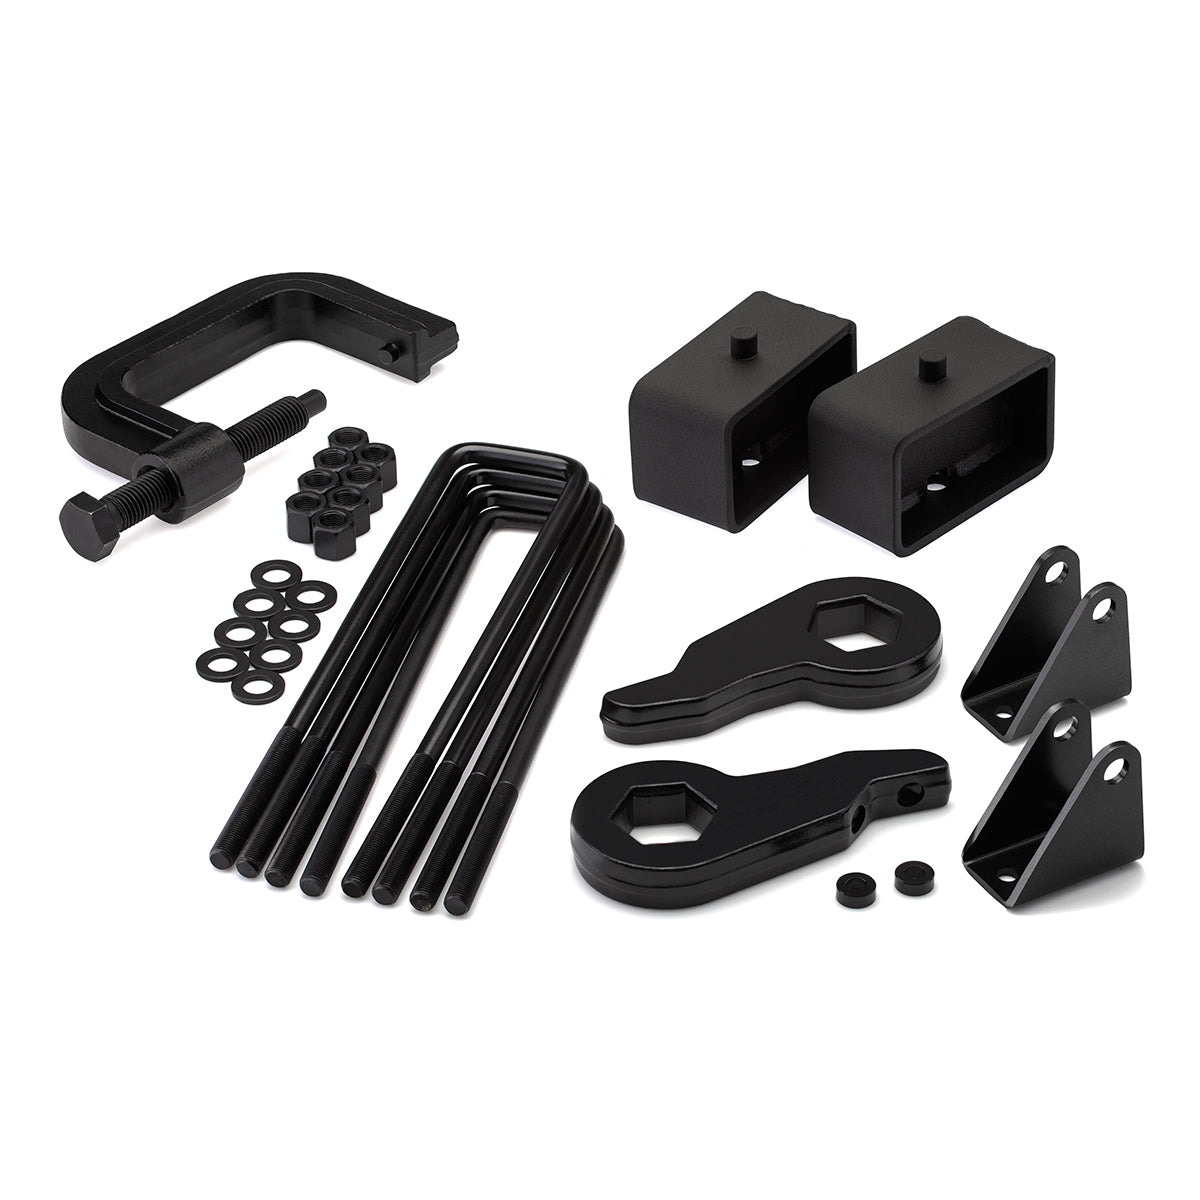 2000-2010 Chevy Silverado 2500HD Full Lift Kit with Shock Extender Brackets and Torsion Key Unloading/Removal Tool